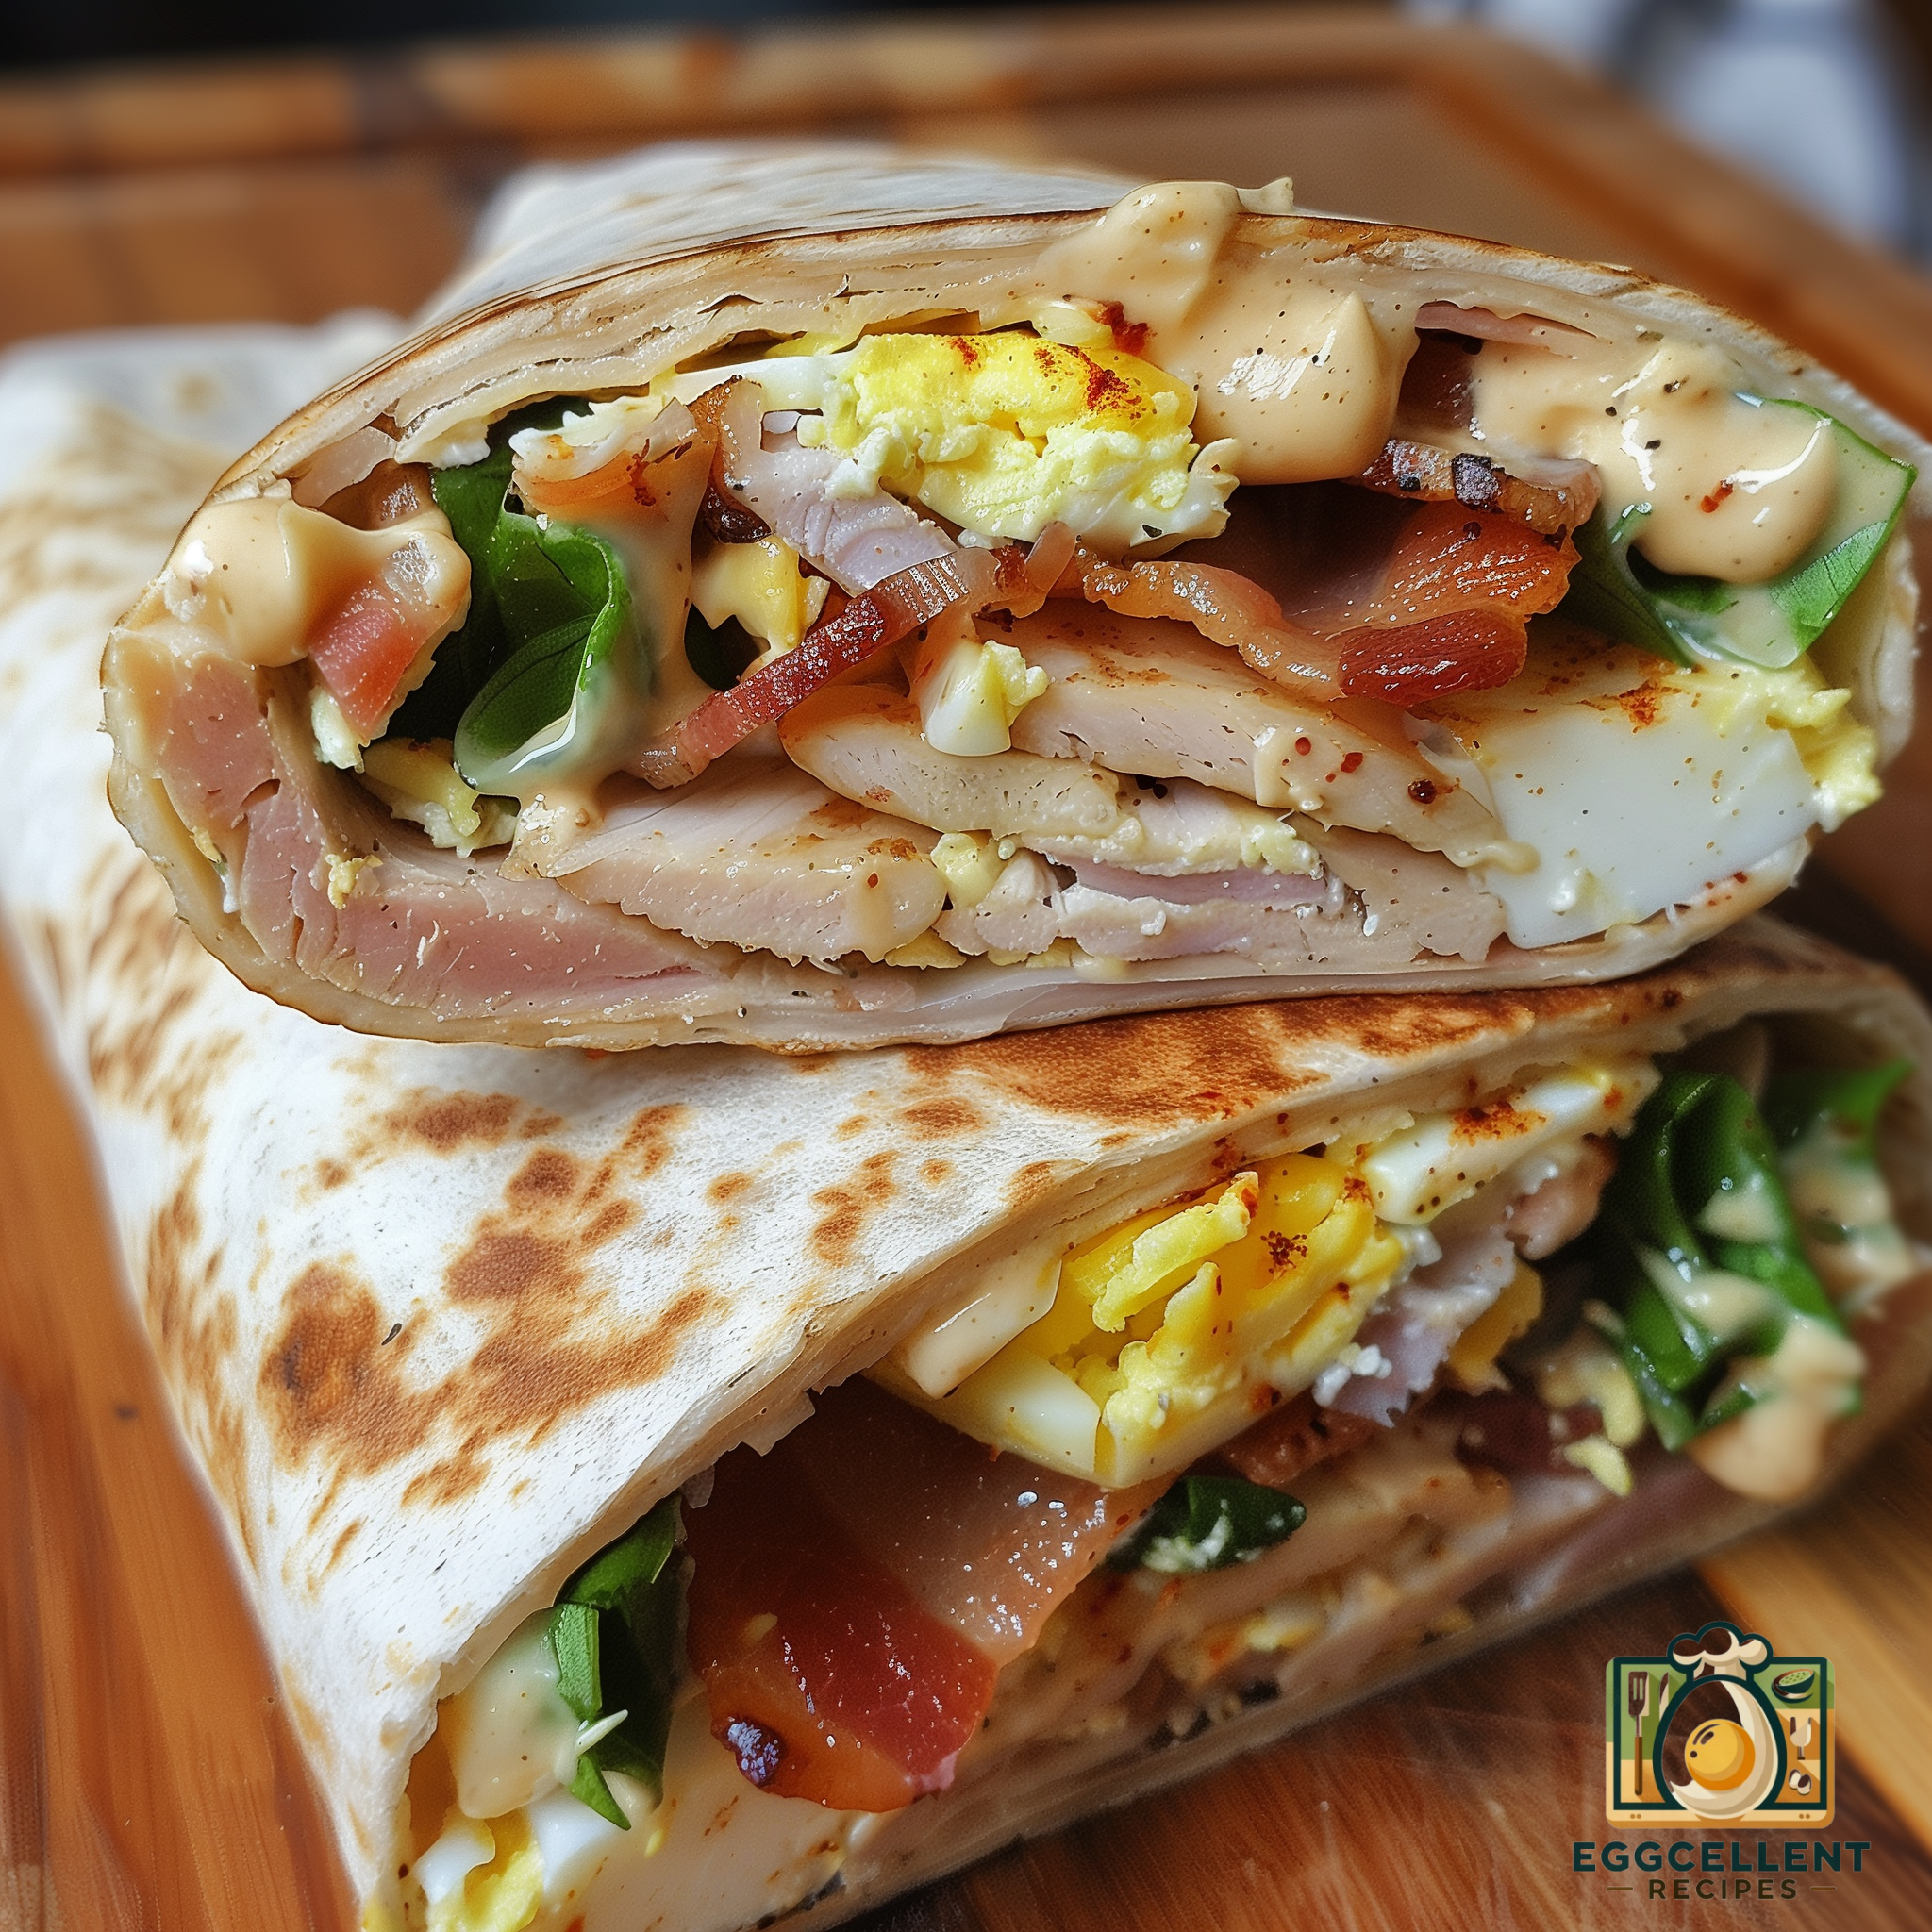 Turkey, Bacon, and Egg Wrap with Chipotle Mayo Recipe